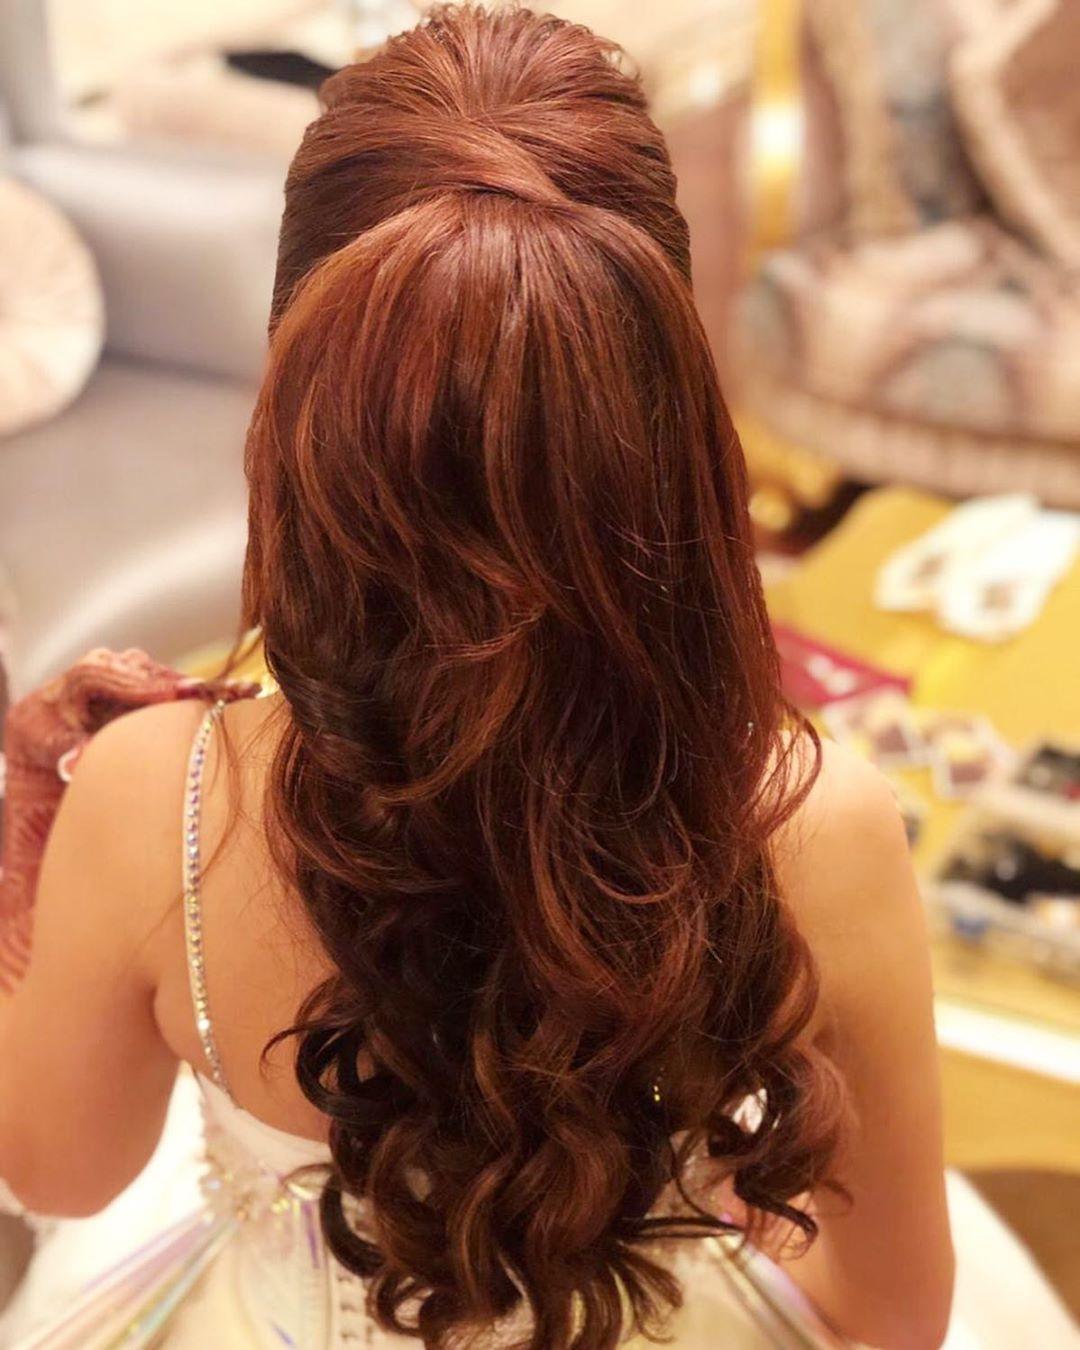 10 Indian Hairstyles for Medium Hair Girls to Try at Home • Keep Me Stylish